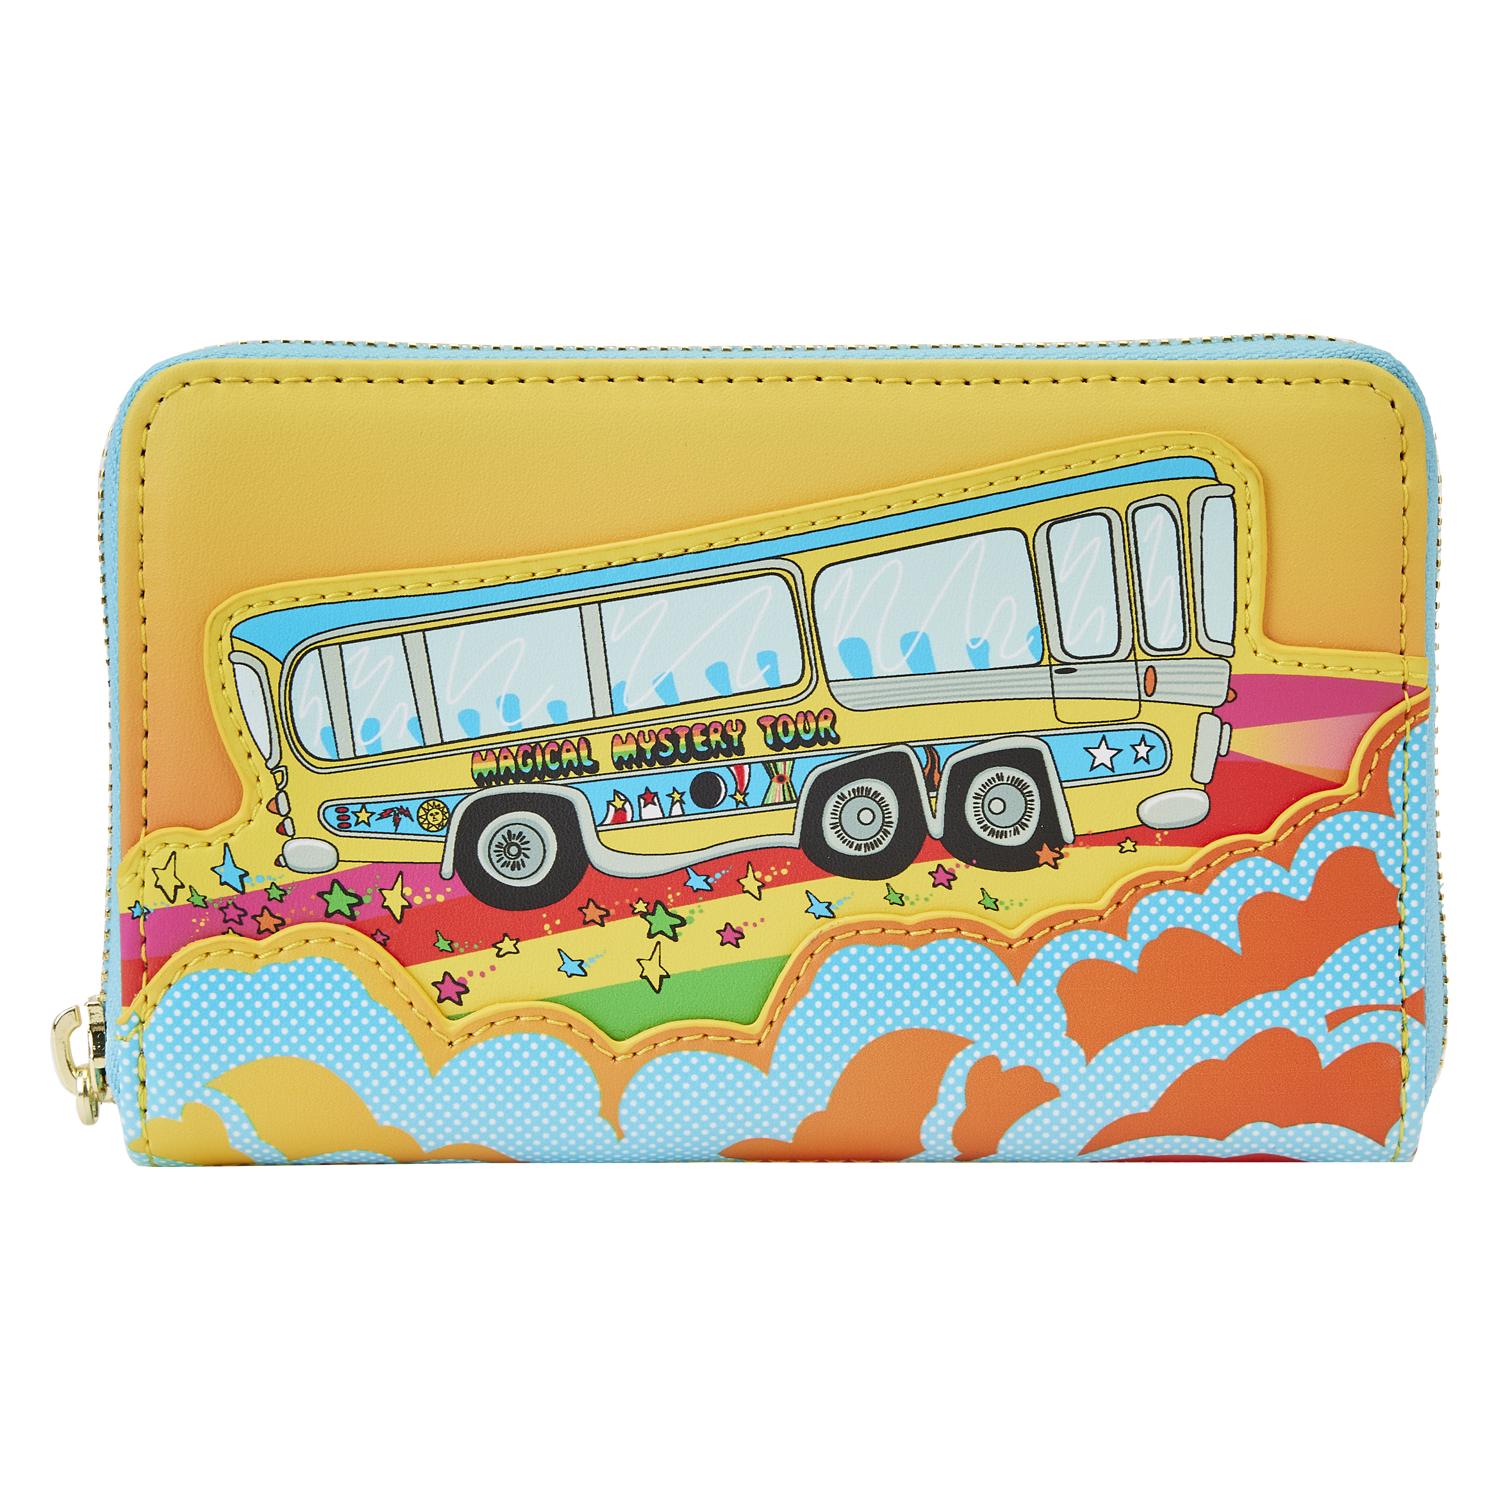 The Beatles x Loungefly Magical Mystery Tour Bus Zip Around Wallet Back